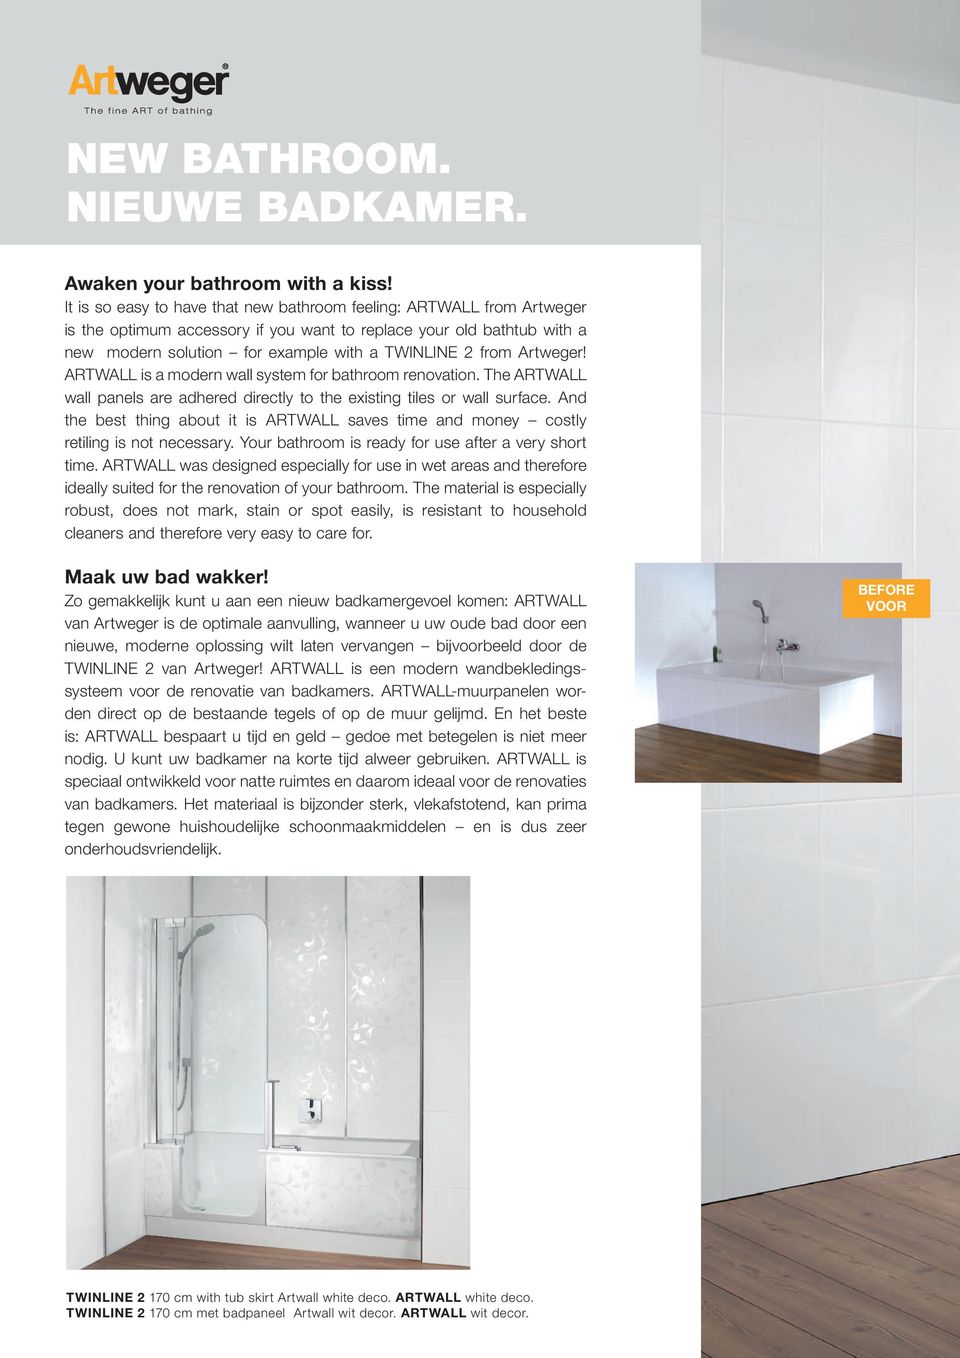 Artweger! ARTWALL is a modern wall system for bathroom renovation. The ARTWALL wall panels are adhered directly to the existing tiles or wall surface.